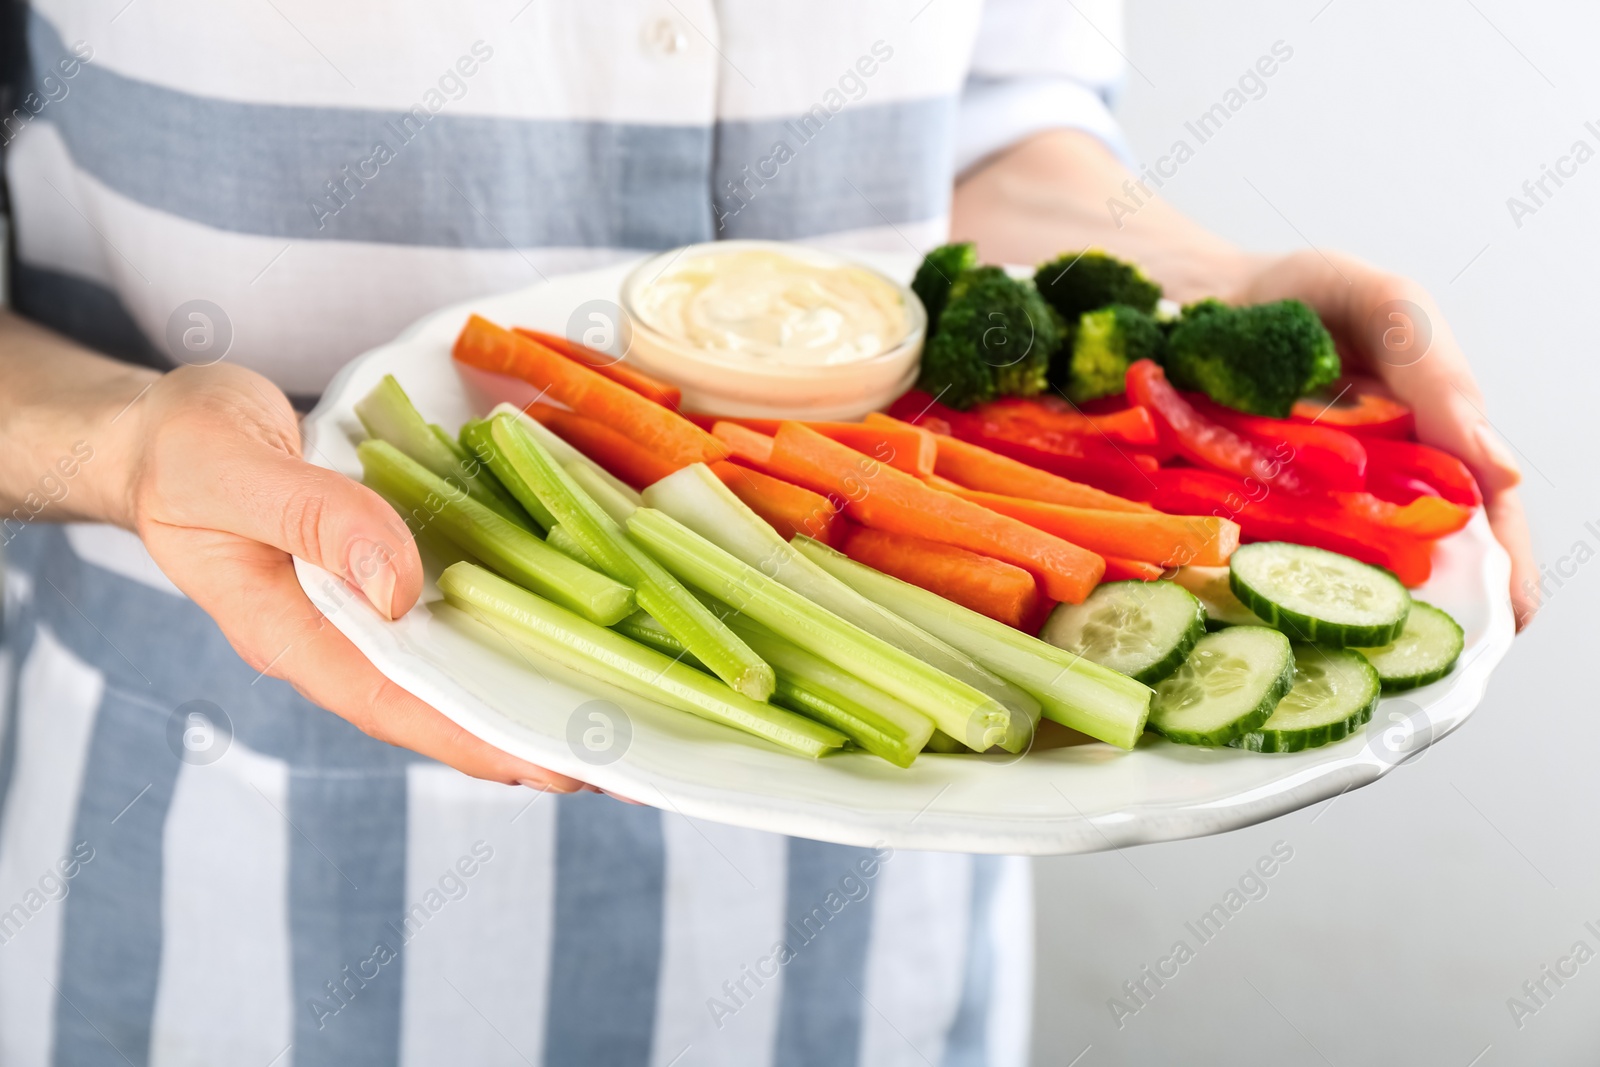 Photo of Woman holding plate with celery sticks, other vegetables and dip sauce on light background, closeup